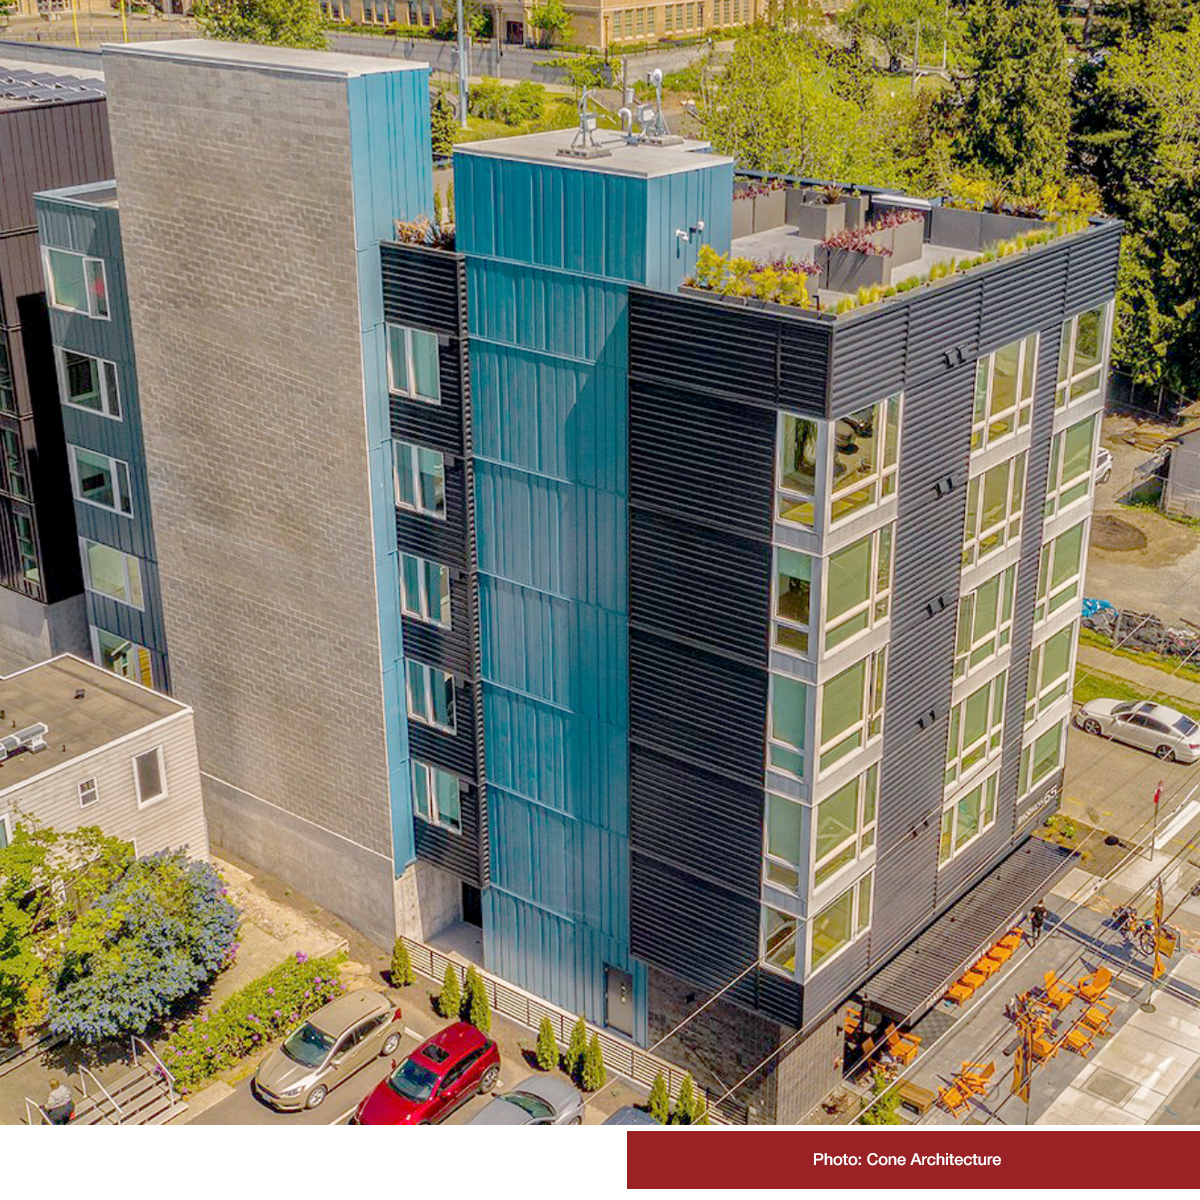 Located in Seattle’s desirable Roosevelt neighborhood, Brooklyn 65 is a prime location for access to the city and its surroundings.
Partners: Blueprint Capital, Cone Architecture
#windowinstallation #construction #seattleliving #fenestration